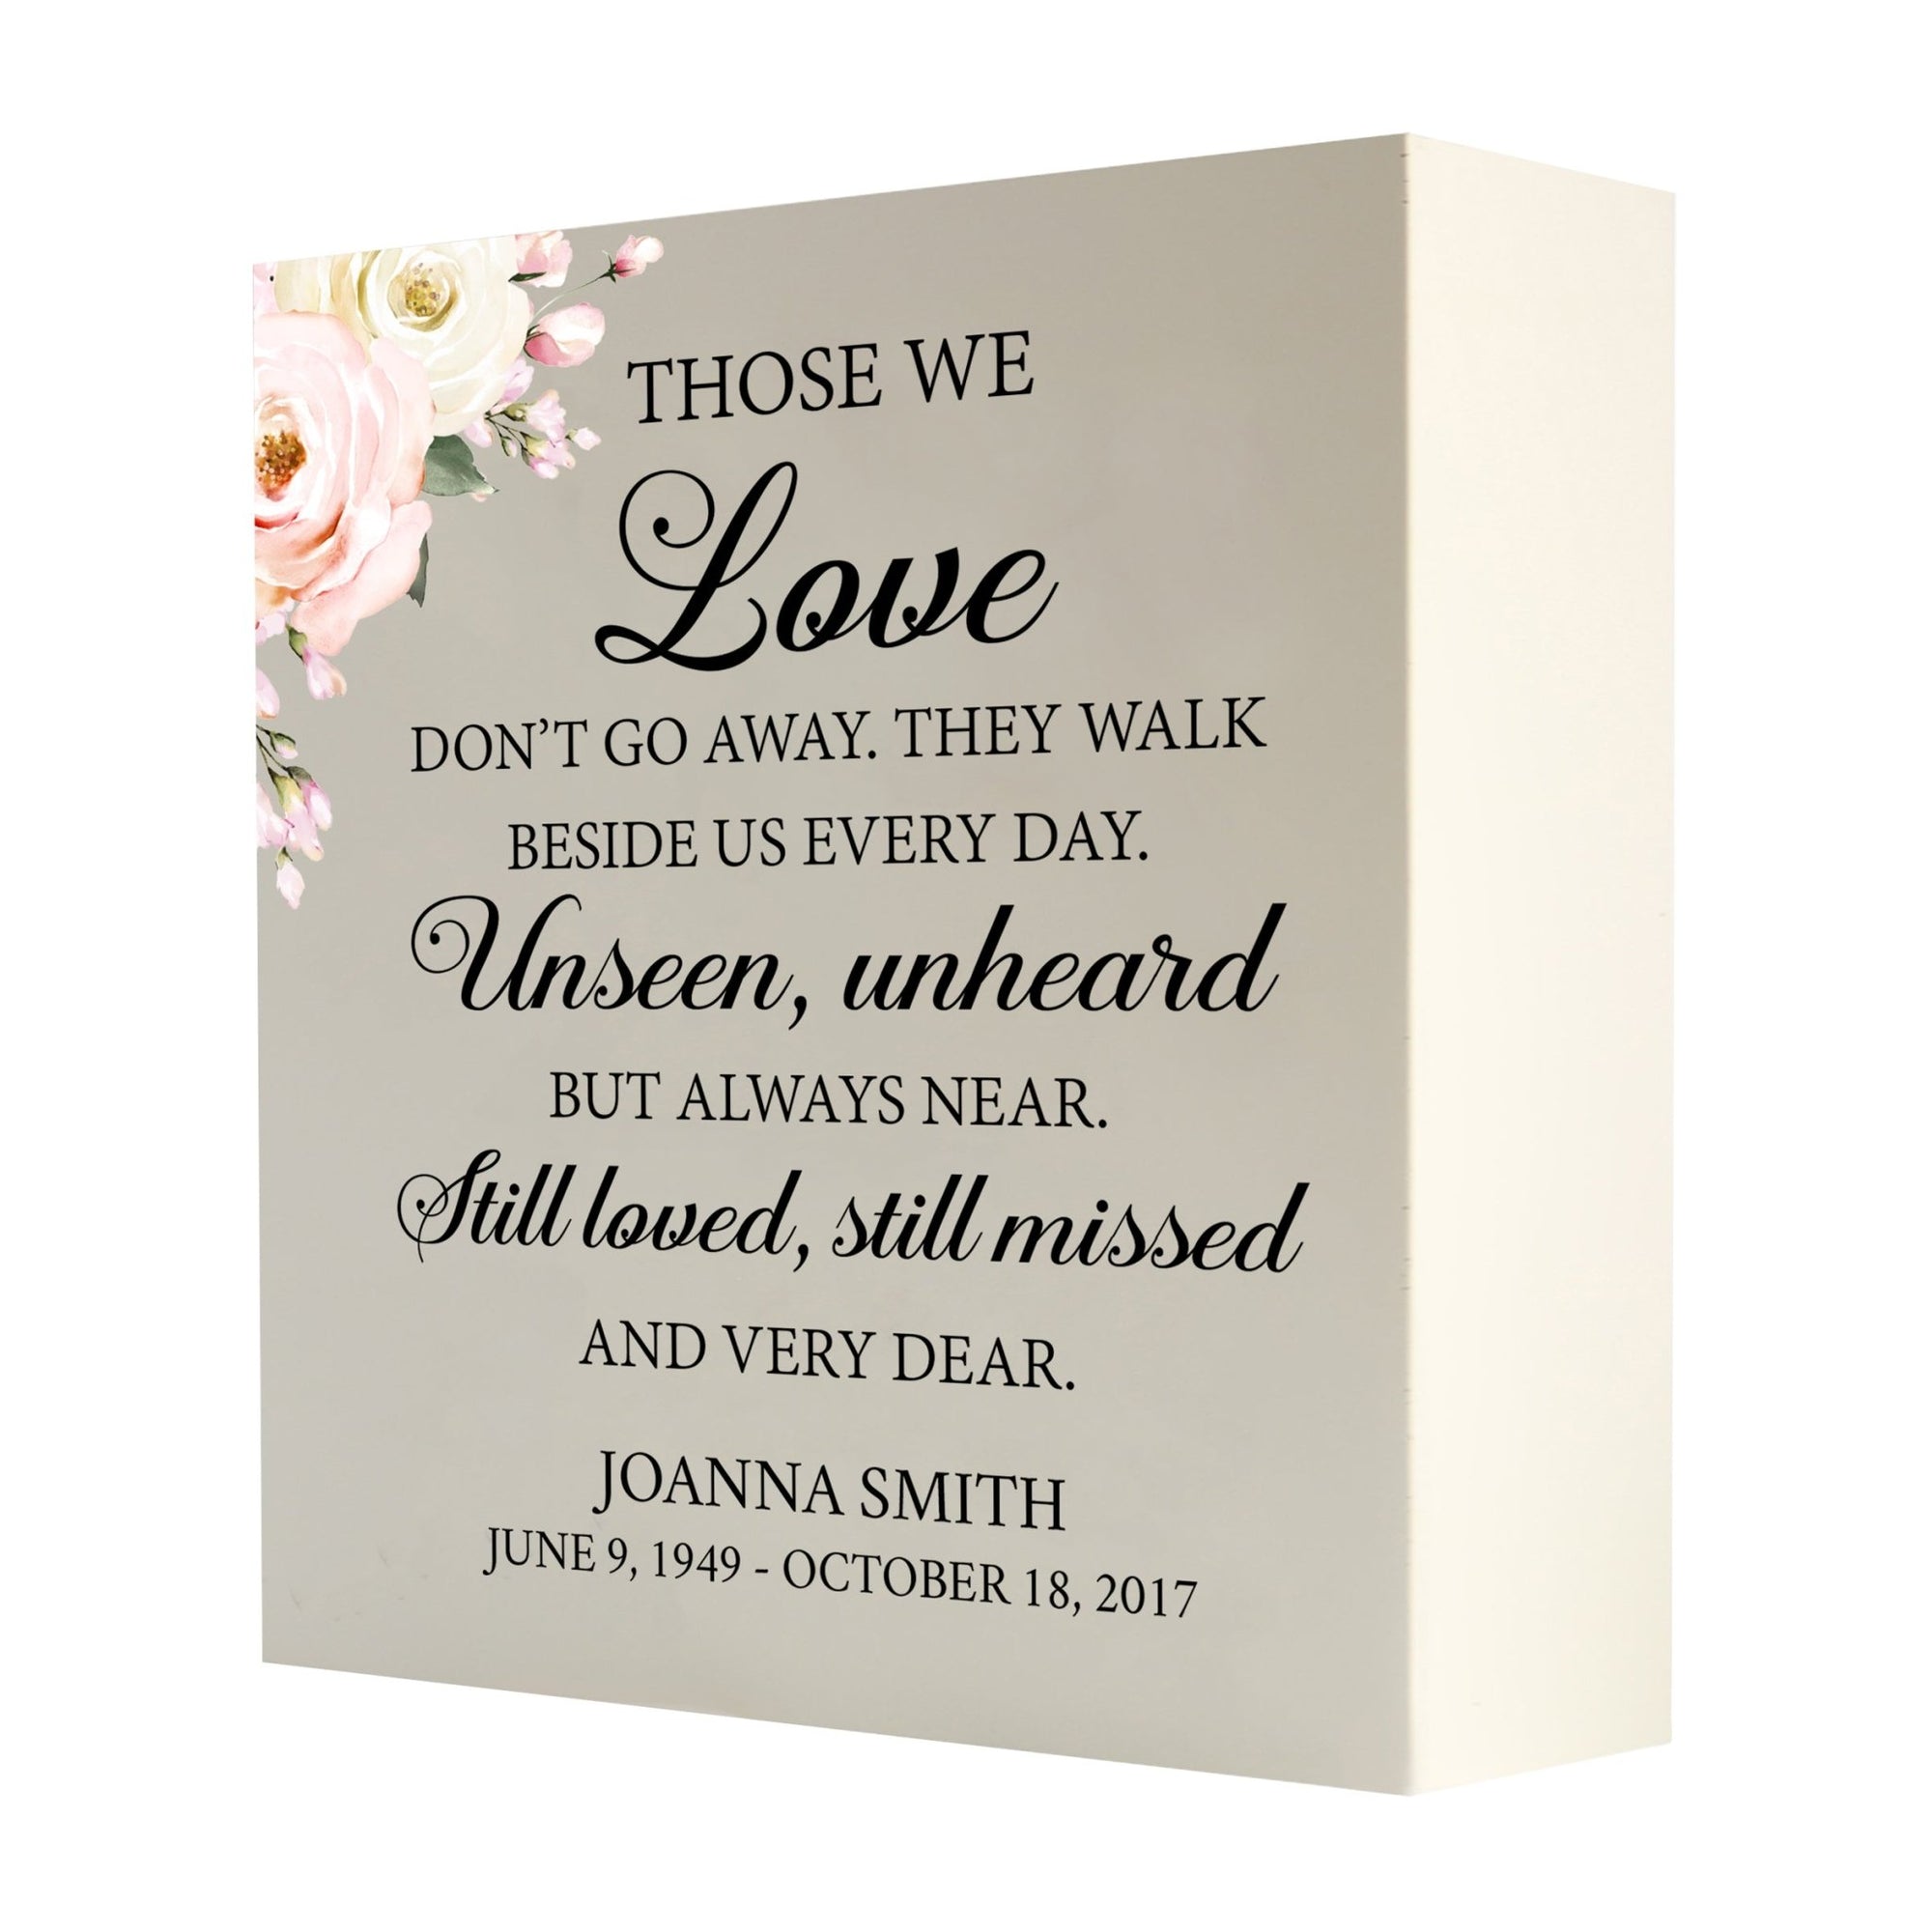 Personalized Modern Inspirational Memorial Wooden Shadow Box and Urn 10x10 holds 189 cu in of Human Ashes - Those We Love Don’t Go (Ivory) - LifeSong Milestones